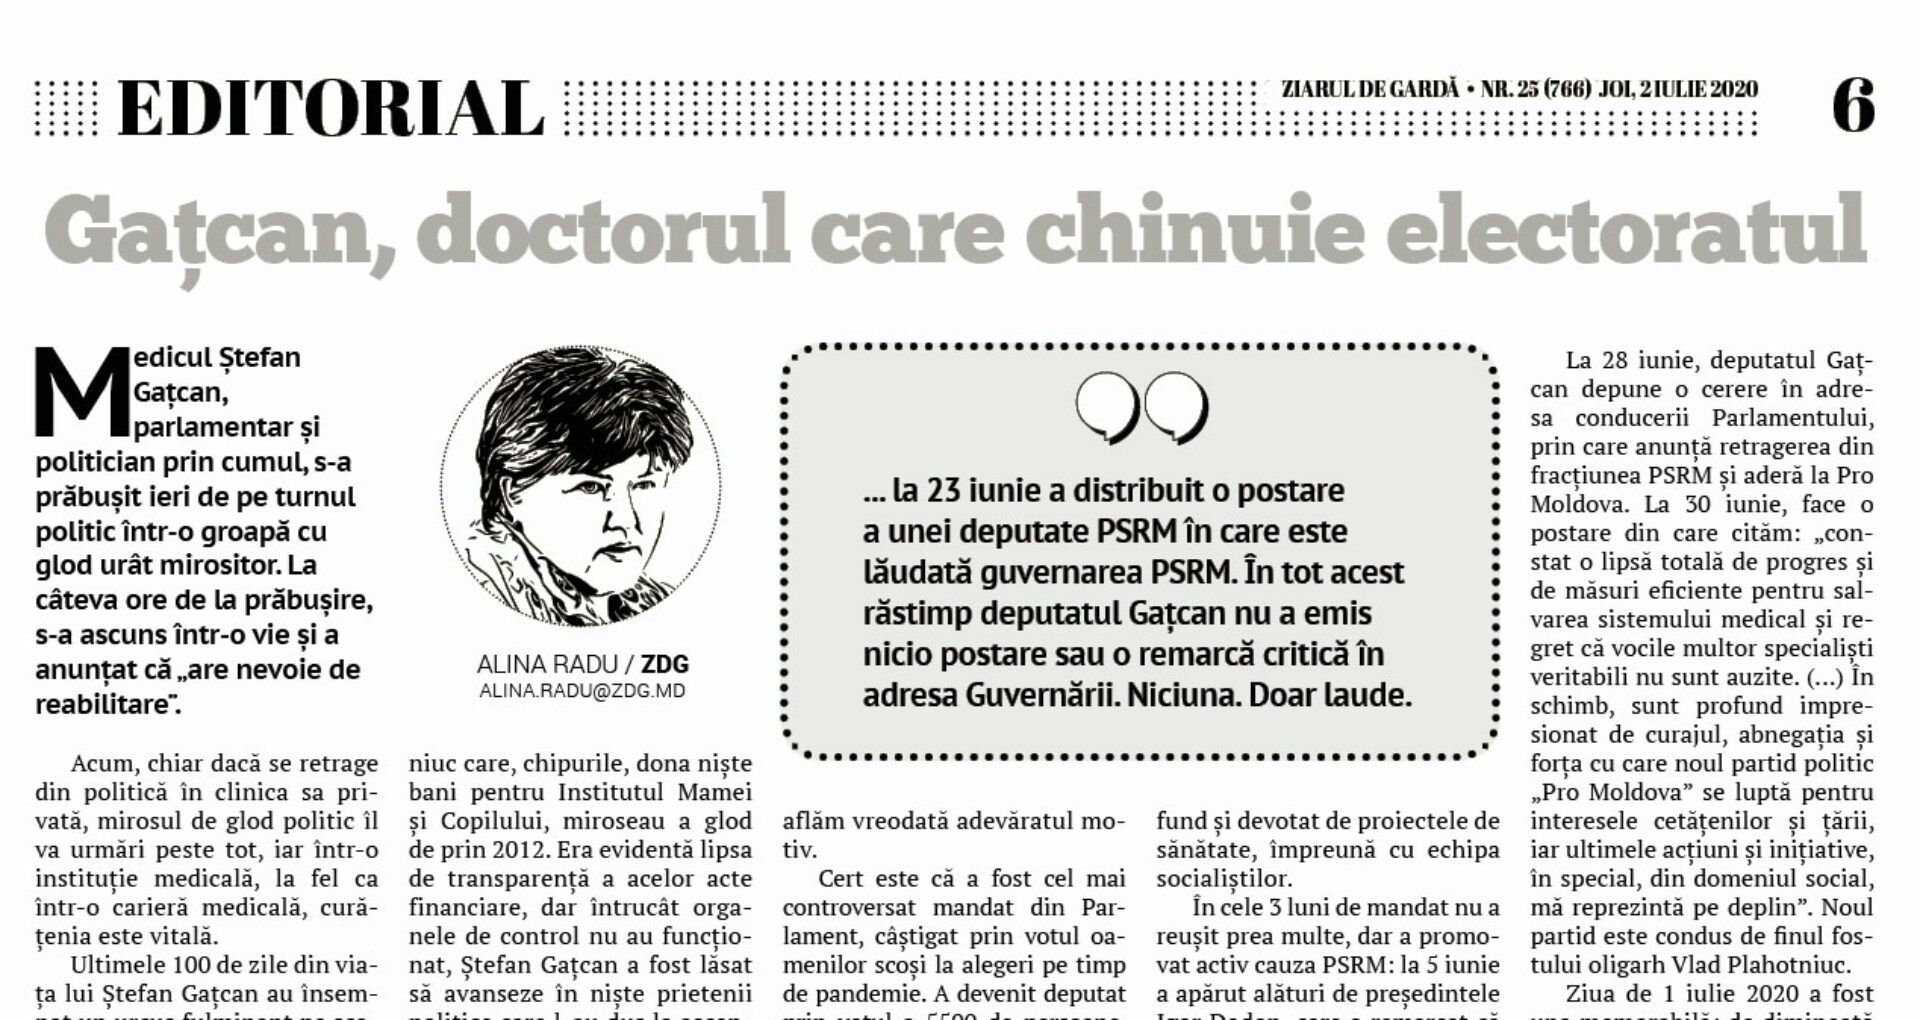 Ștefan Gațcan, the Doctor Who Taunts the Electorate